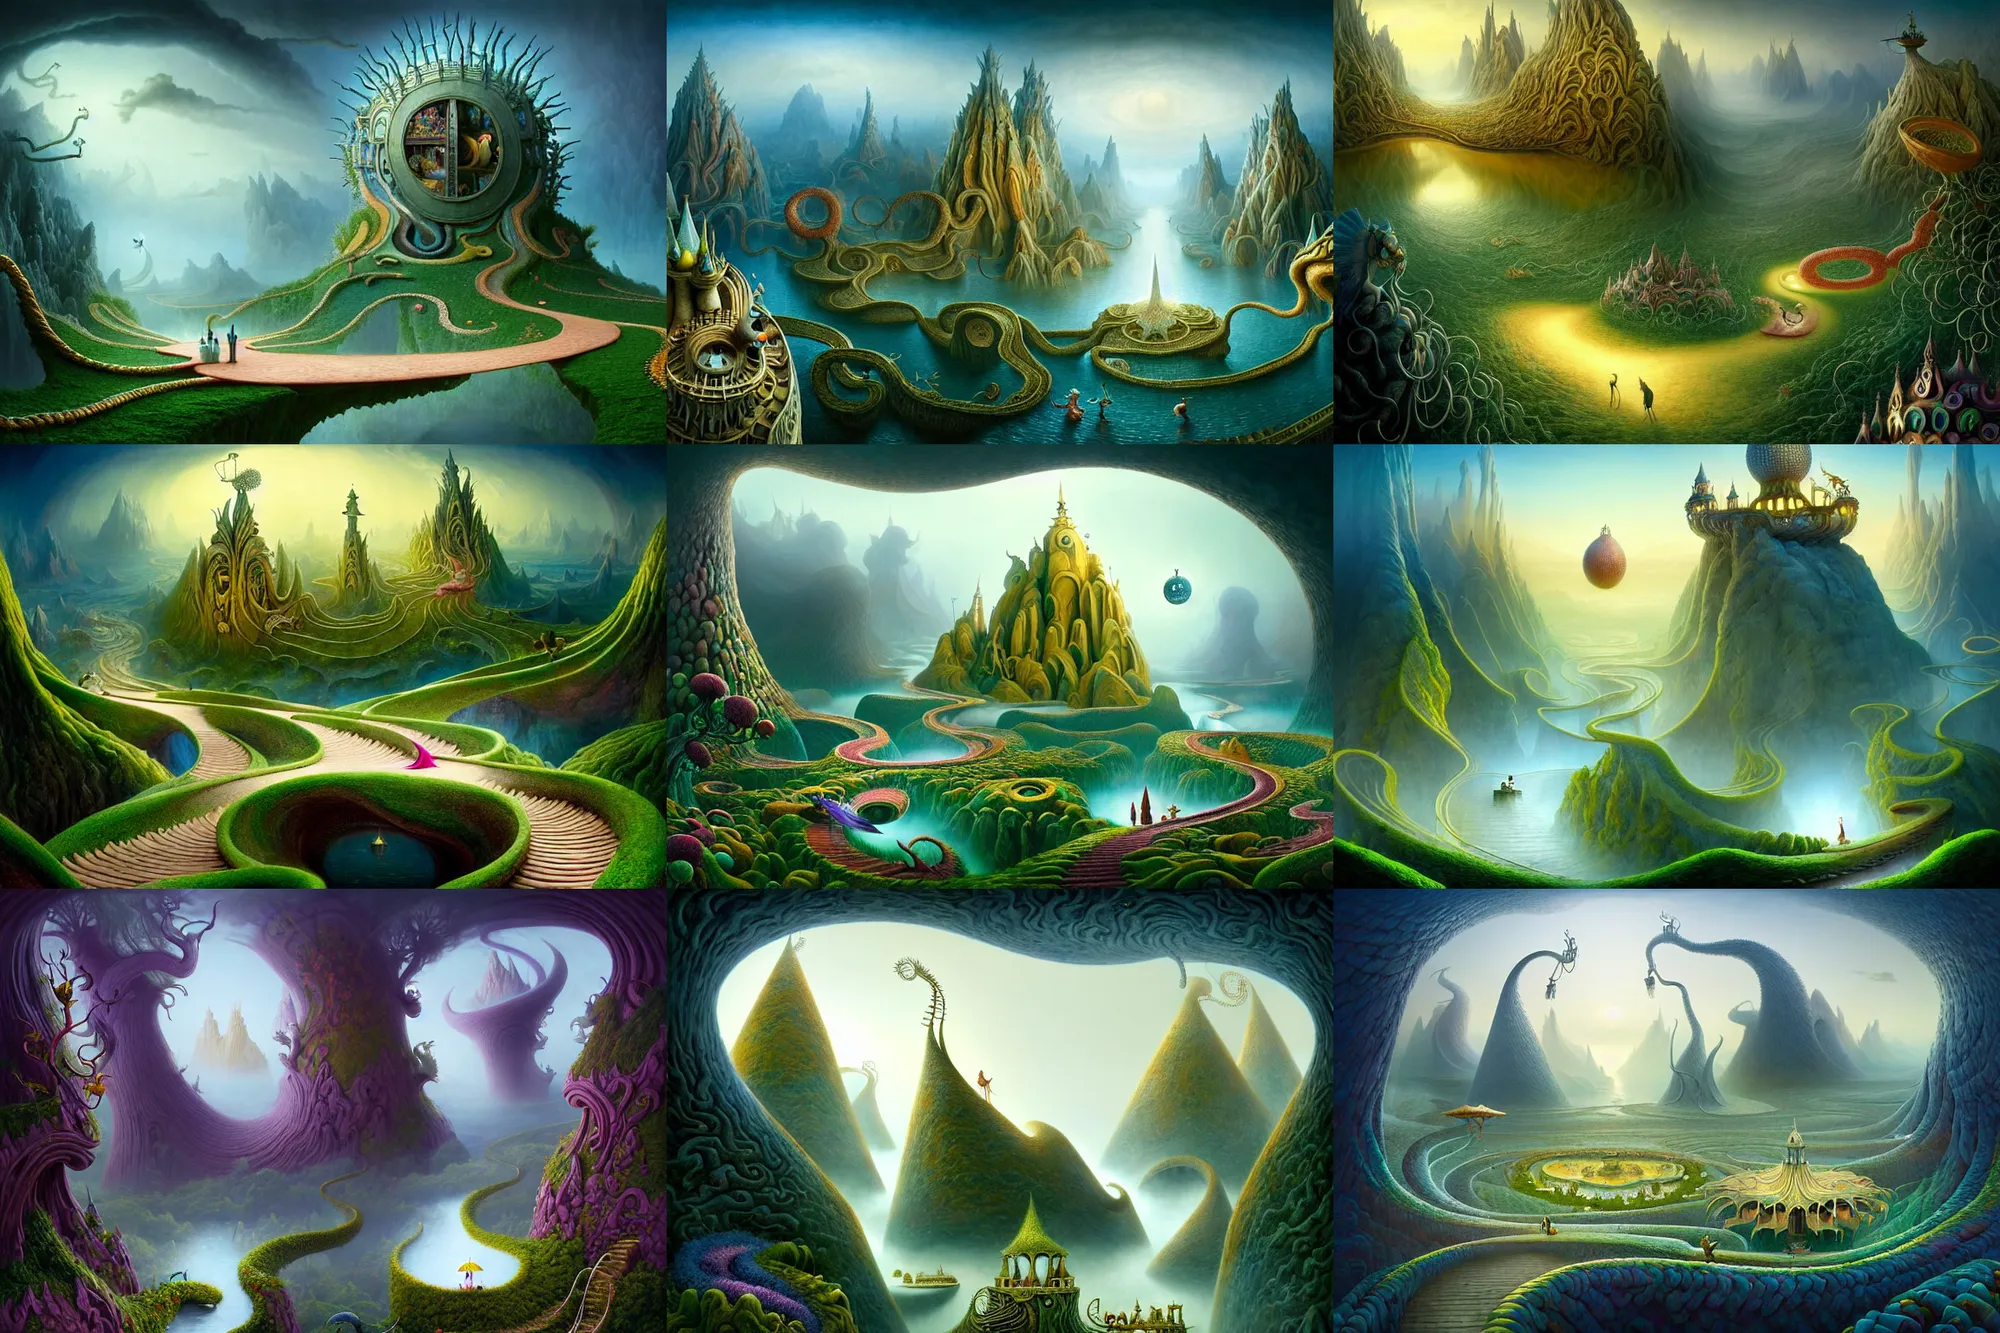 Prompt: a beguiling epic stunning beautiful and insanely detailed matte painting of the impossible winding path in a dream world with surreal architecture designed by Heironymous Bosch, dream world populated with mythical whimsical creatures, mega structures inspired by Heironymous Bosch's Garden of Earthly Delights, vast surreal landscape and horizon by Cyril Rolando and Andrew Ferez and Mike Azevedo, masterpiece!!!, grand!, imaginative!!!, whimsical!!, epic scale, intricate details, sense of awe, elite, wonder, insanely complex, masterful composition!!!, sharp focus, fantasy realism, dramatic lighting